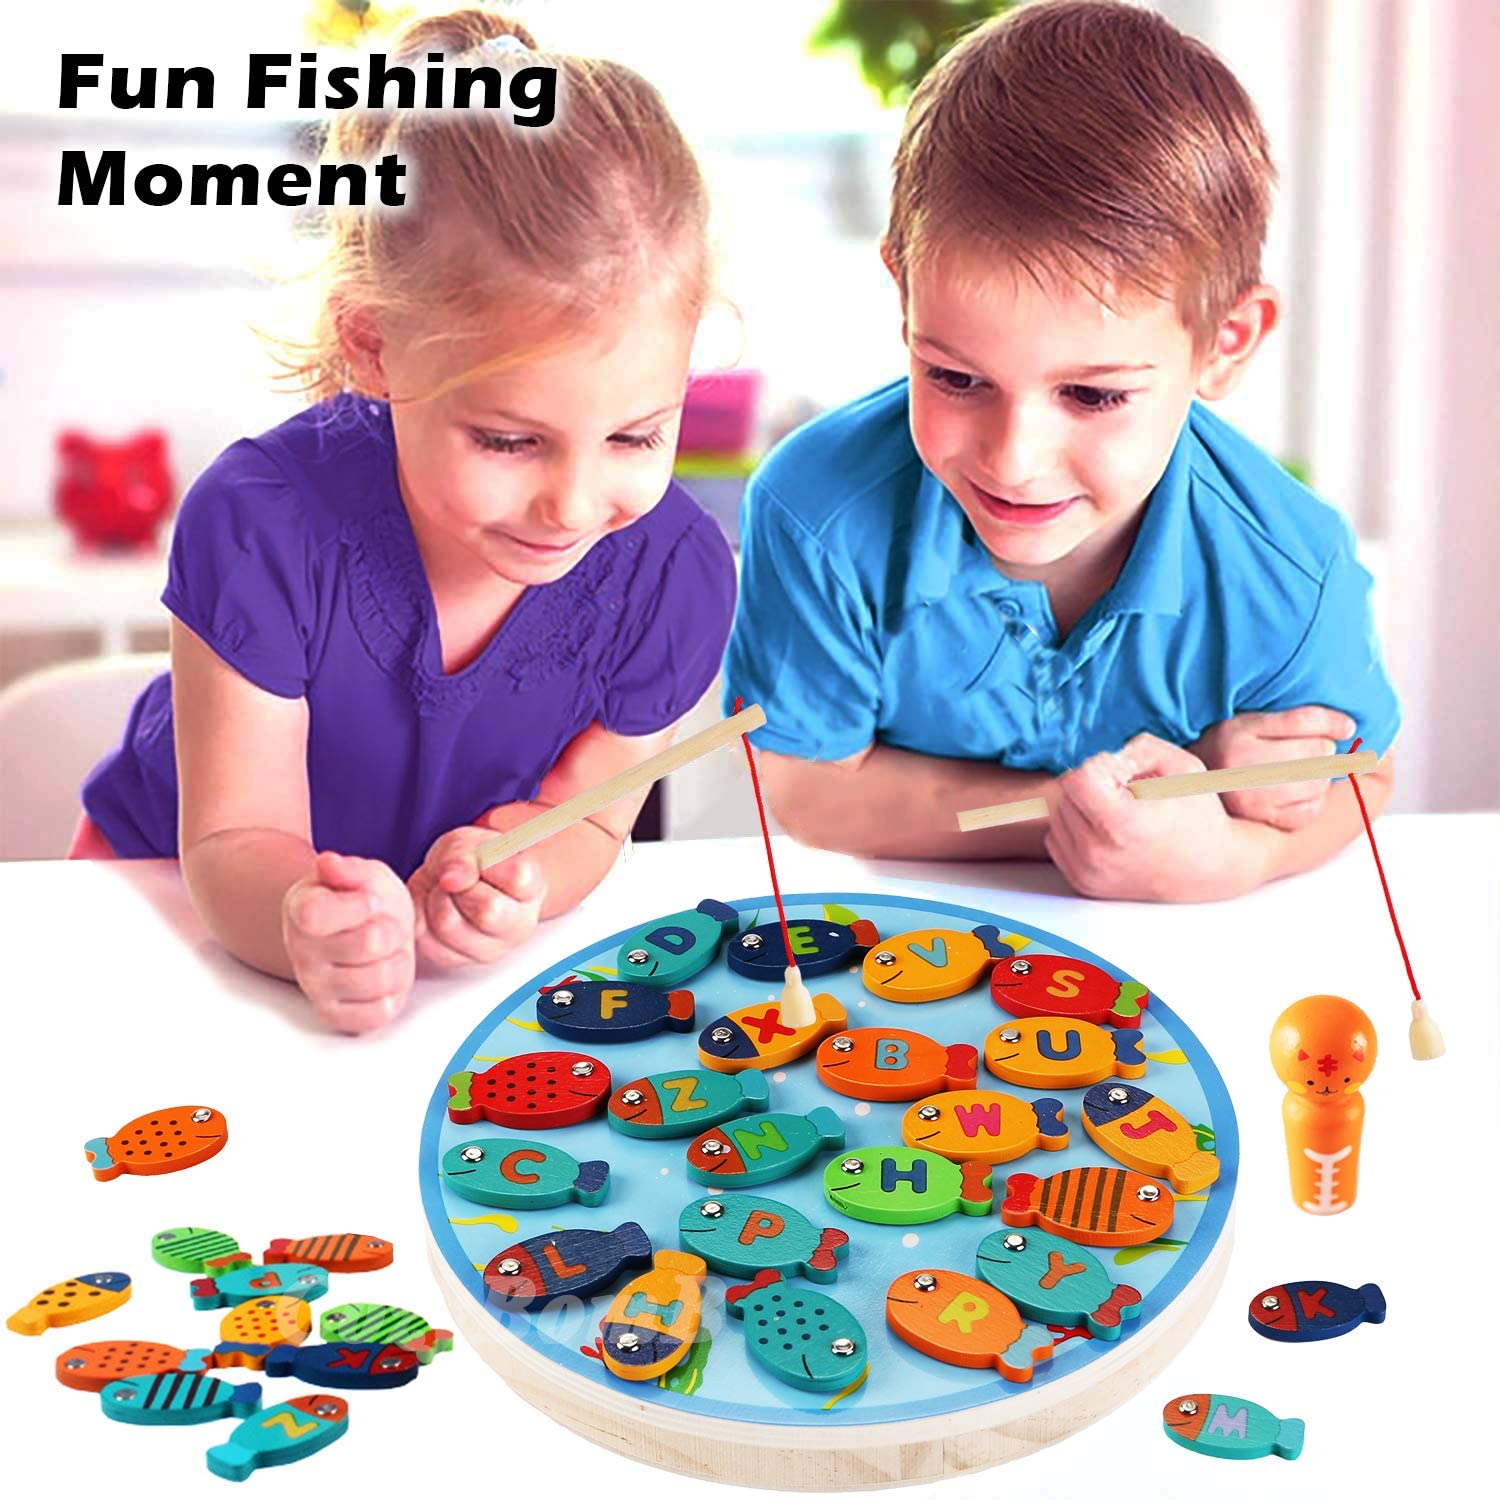 Magnetic Wooden Fishing Games for Toddlers Creative Fish Catching